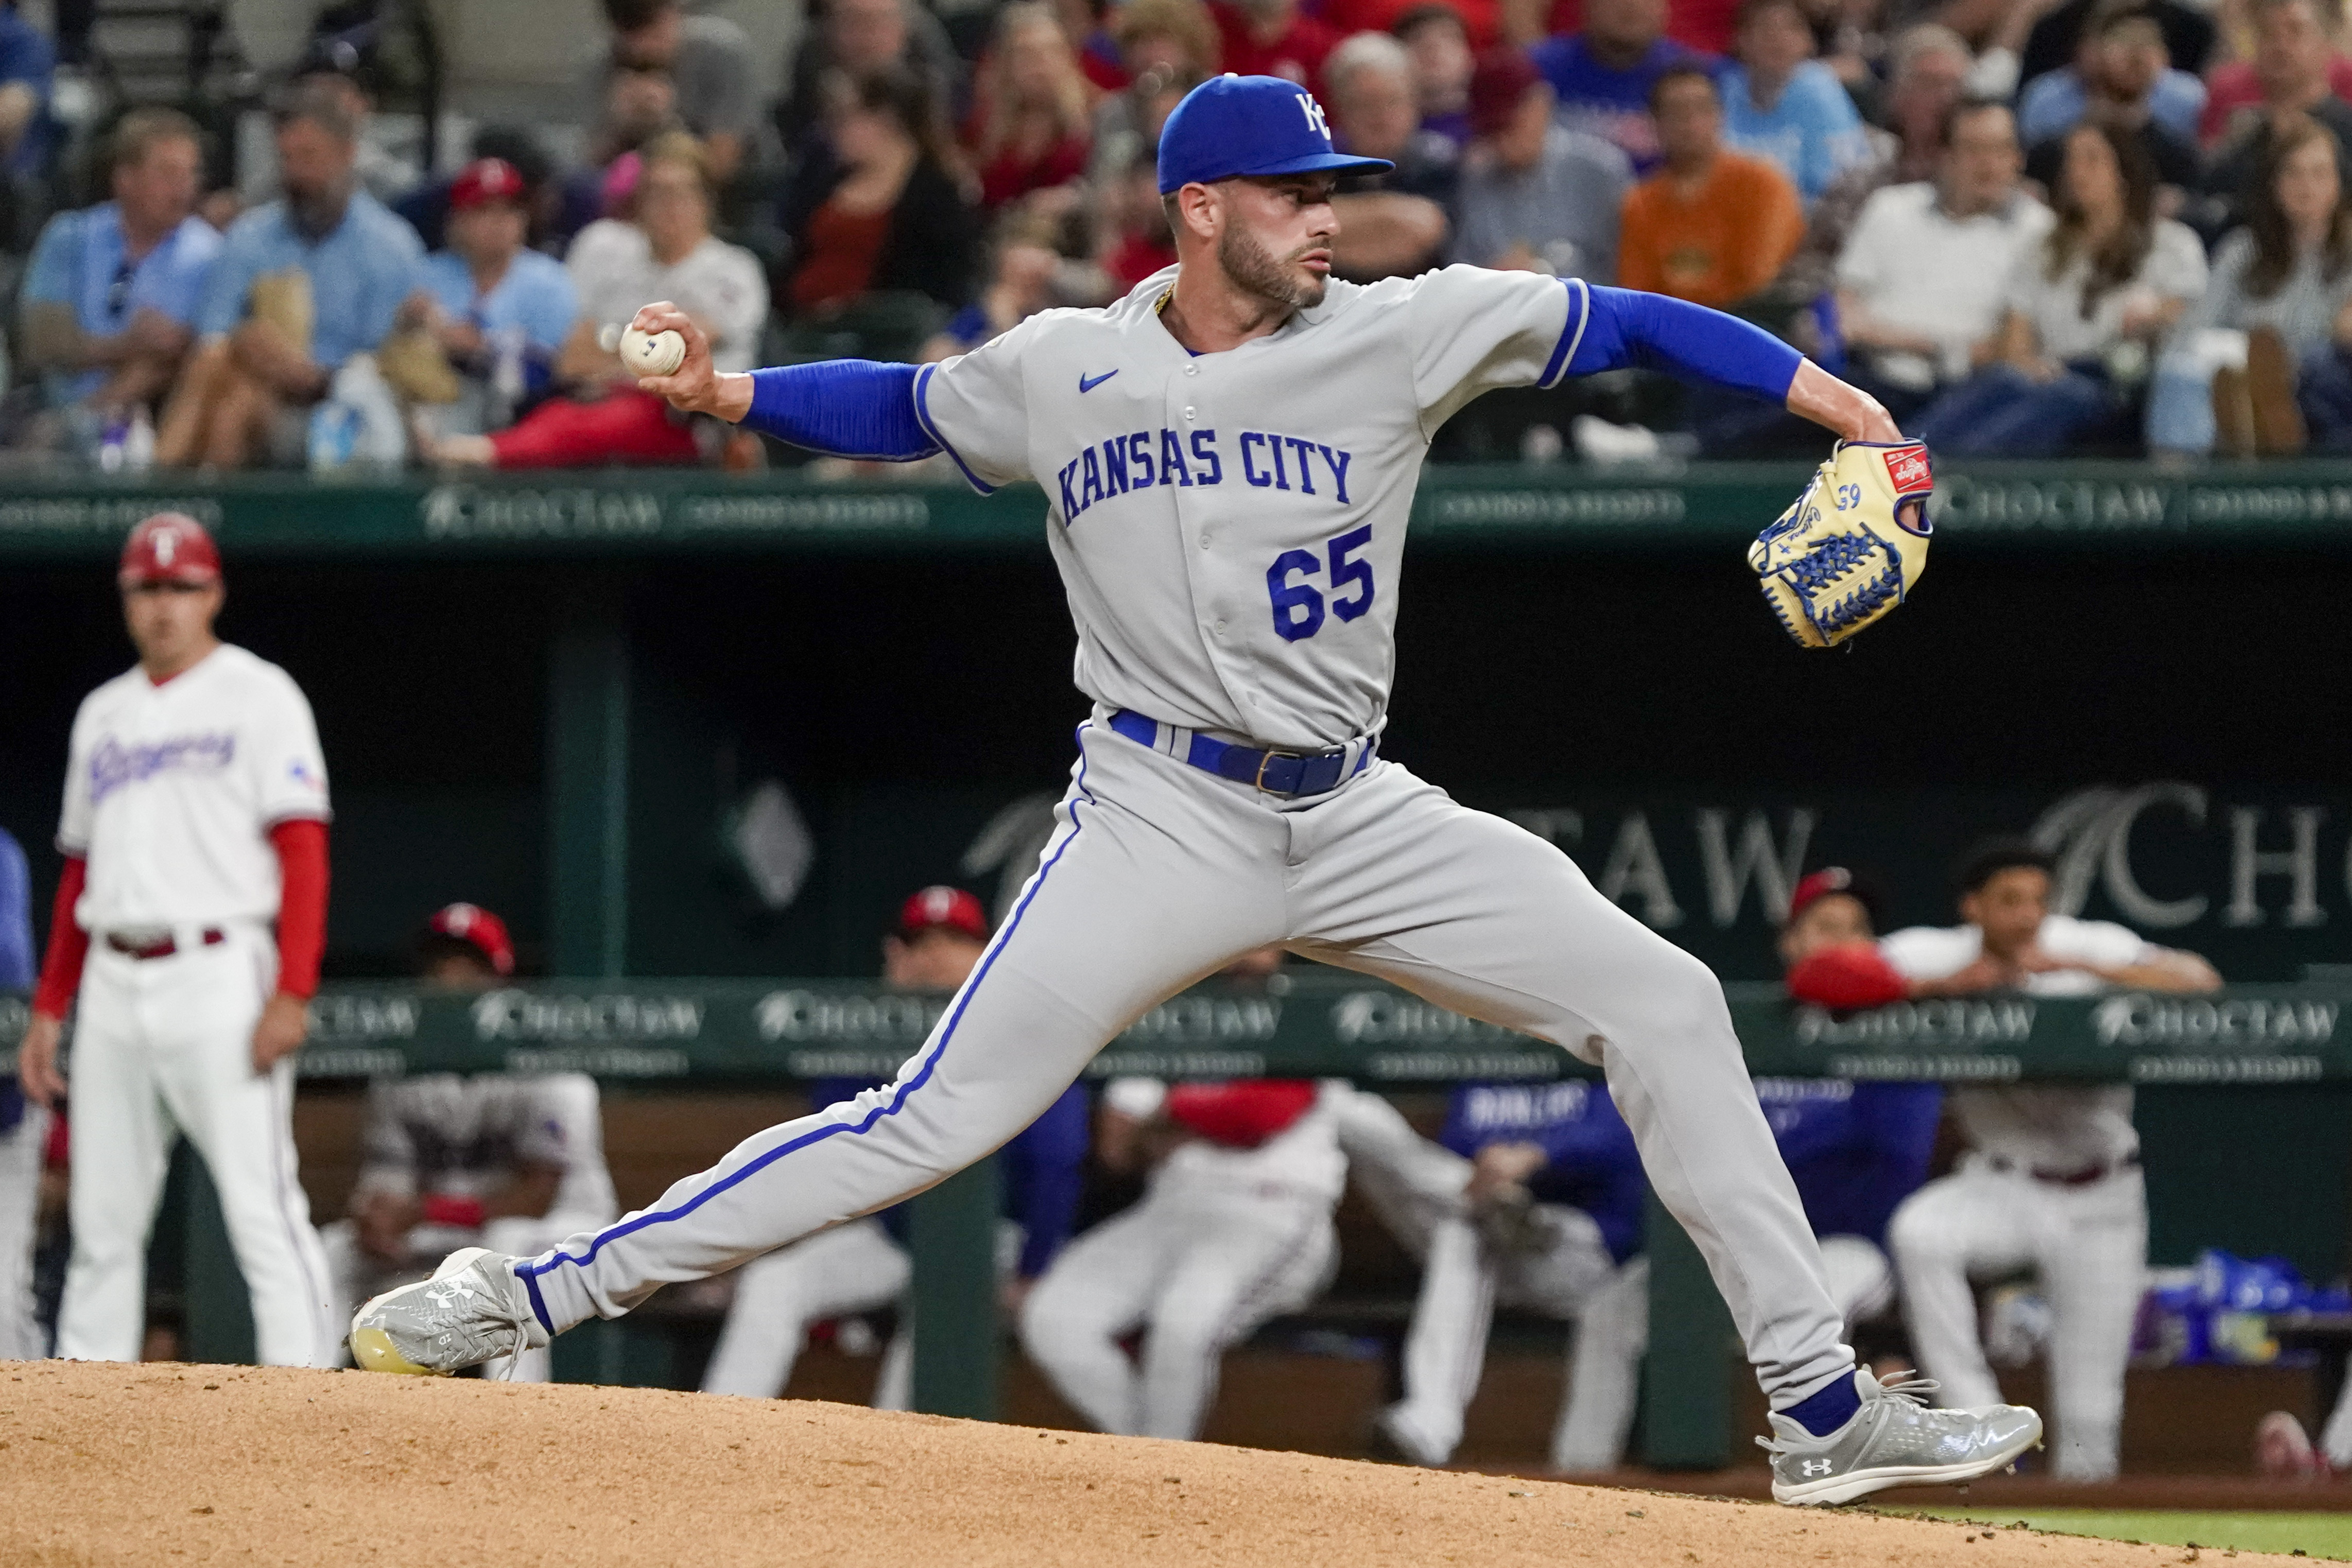 Andrew Heaney ties AL strikeout mark as Rangers rout Royals